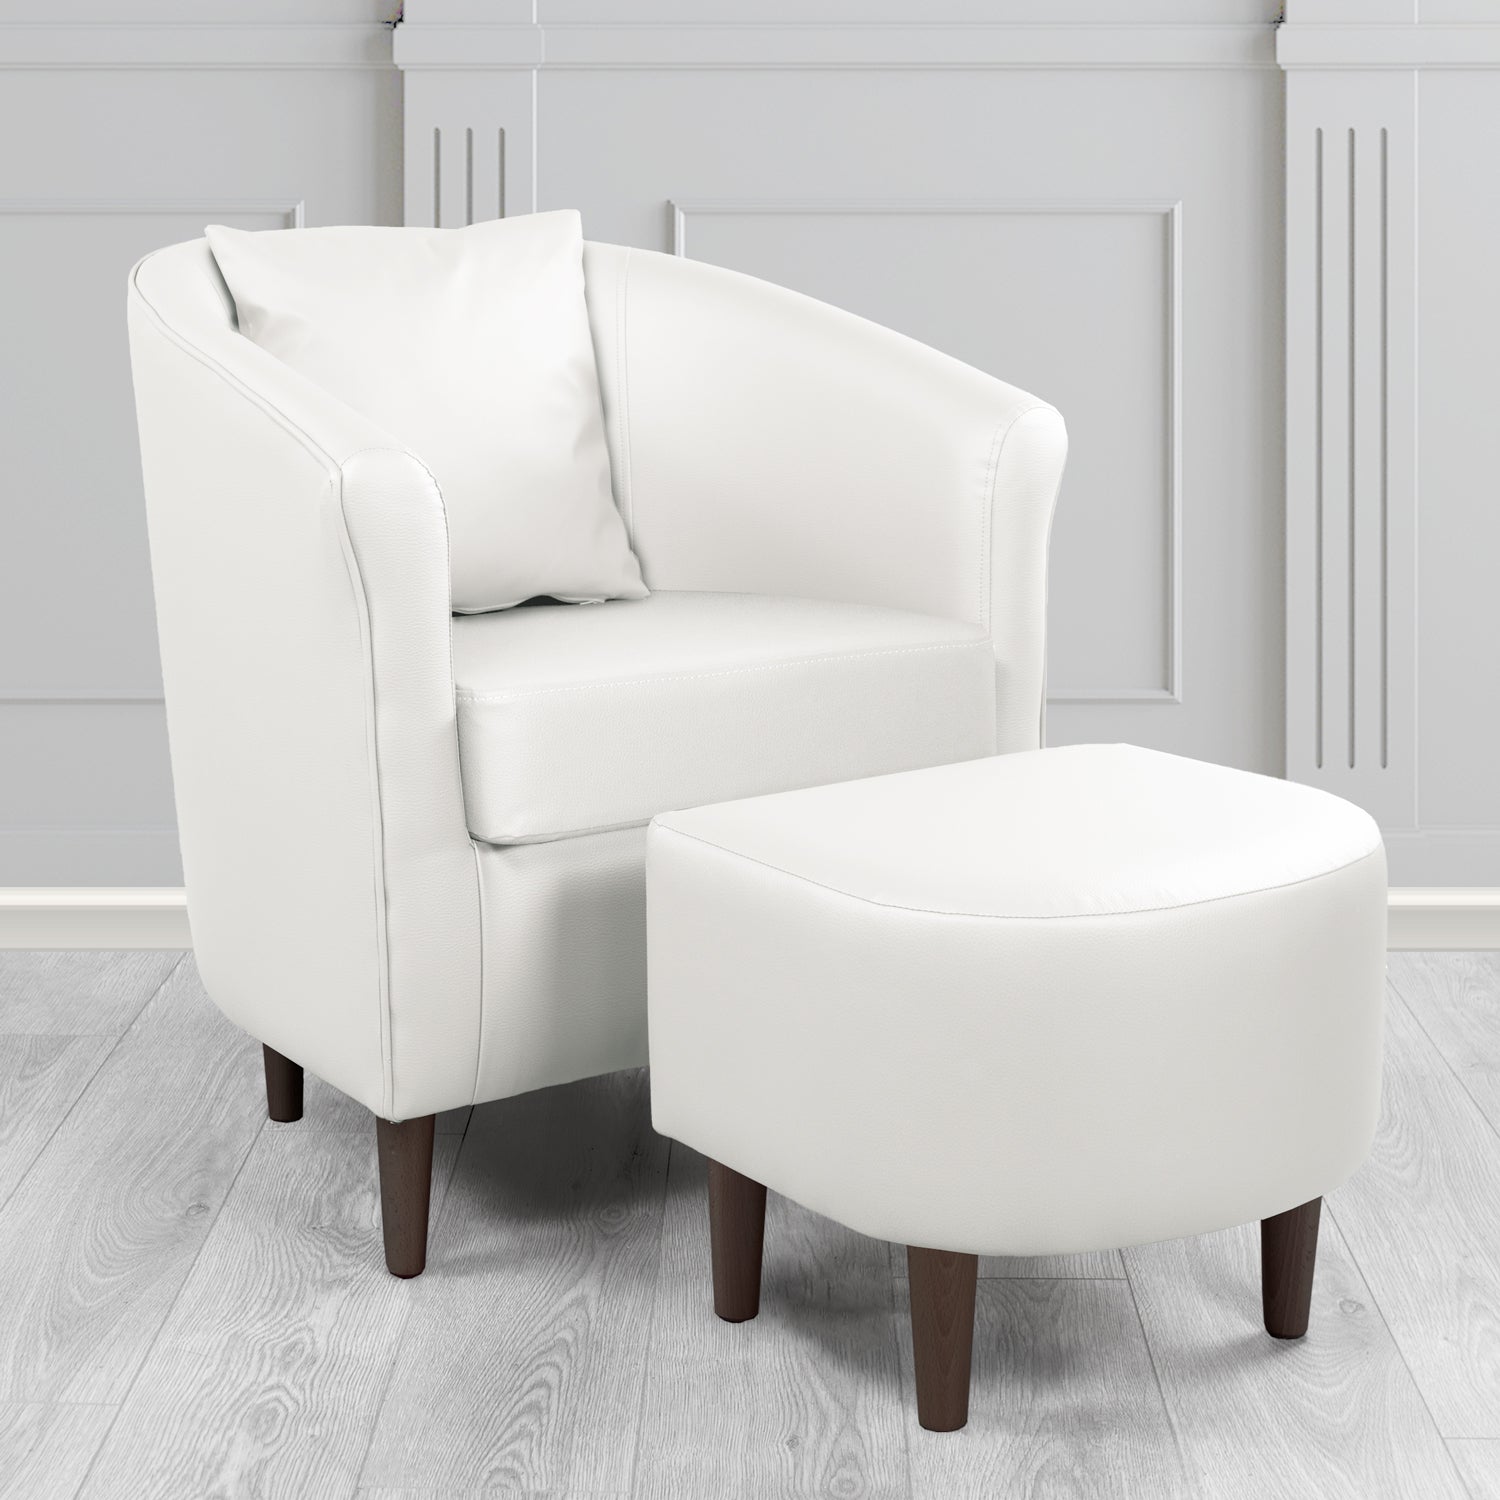 St Tropez Tub Chair with Footstool Set in Madrid White Faux Leather - The Tub Chair Shop